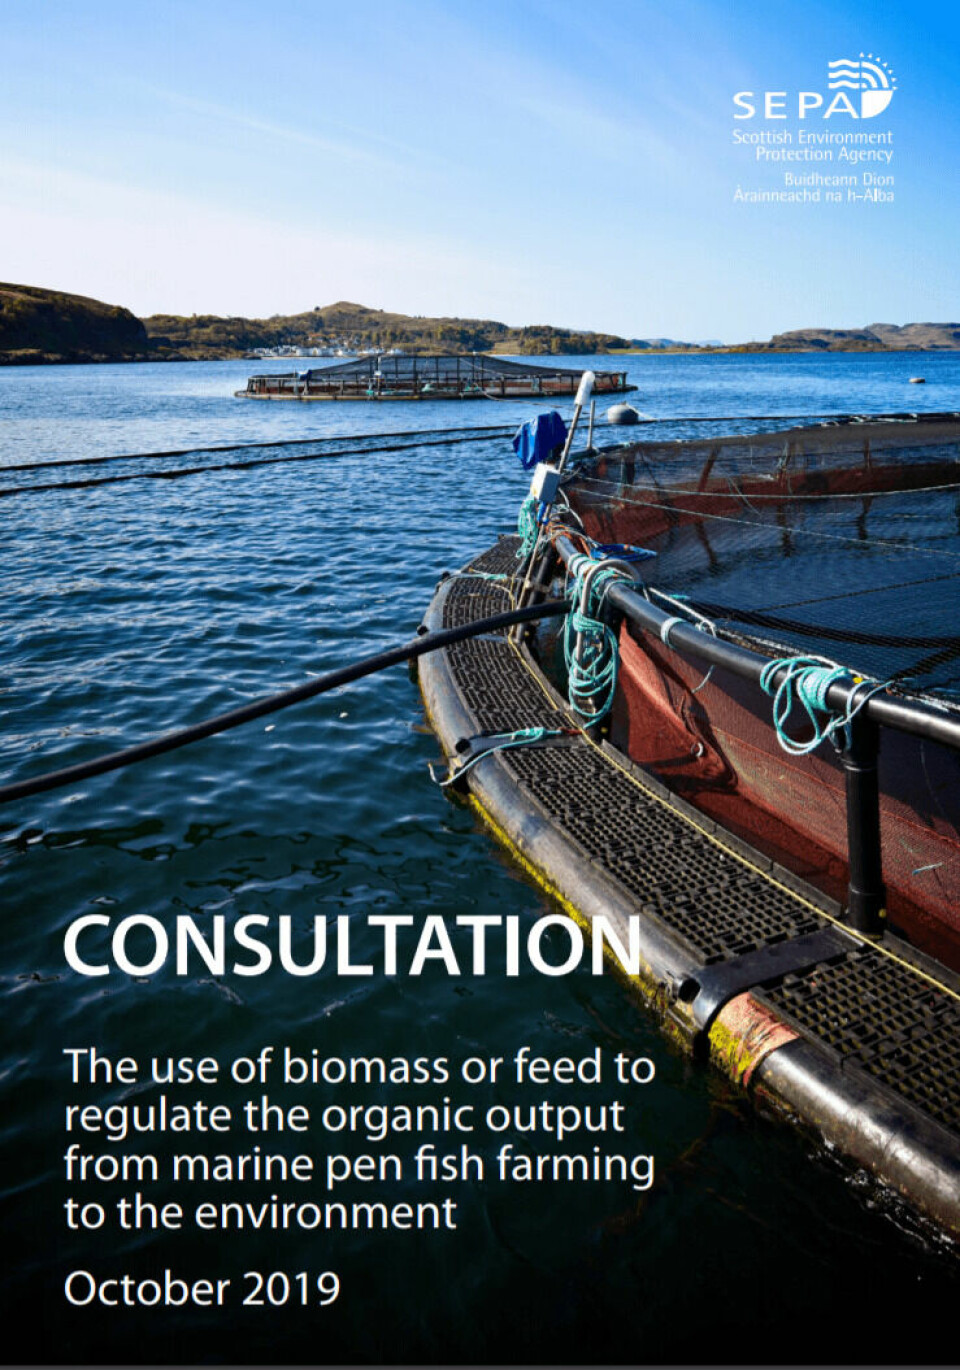 SEPA's consultation document on its controversial feed limit proposal.